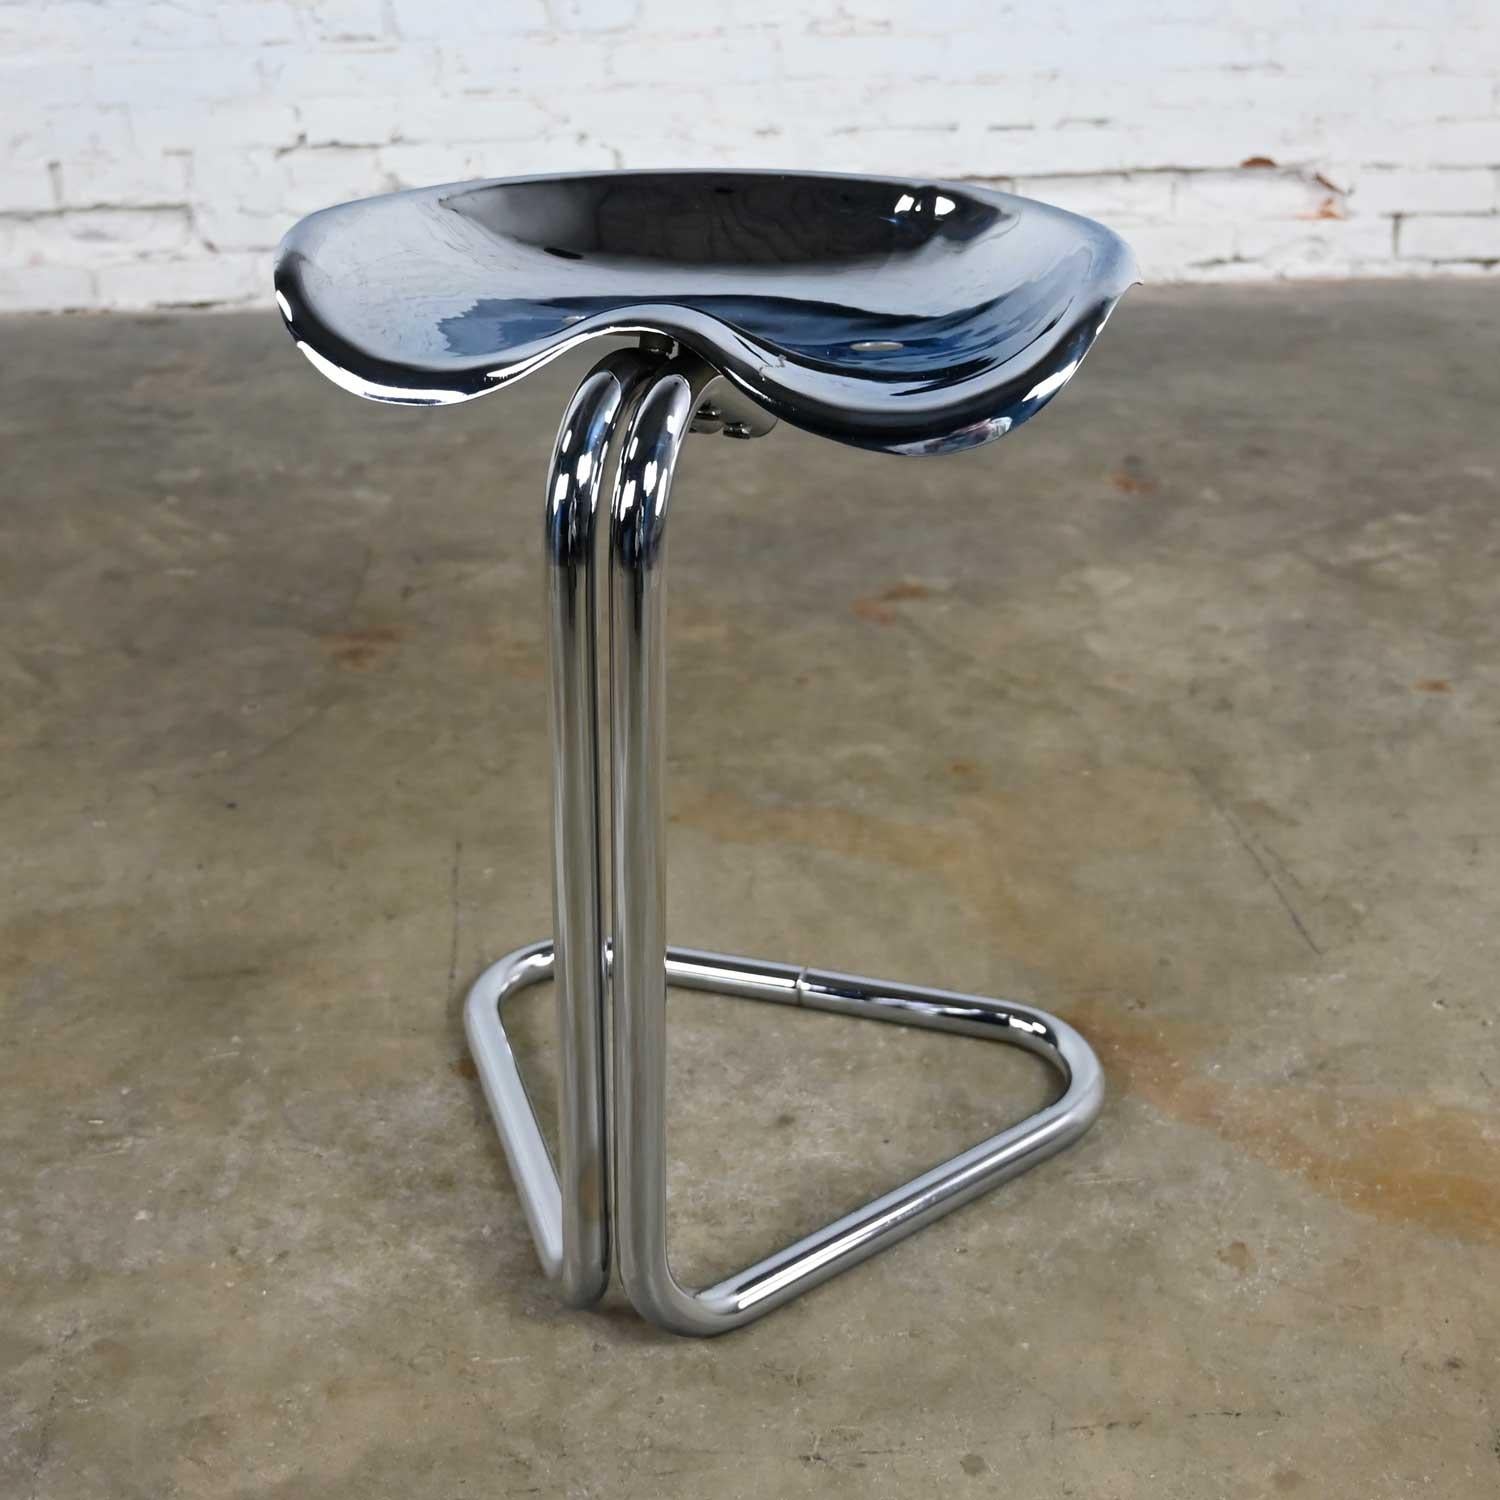 English Vintage MCM Chrome Tractor Stool Chair Height by Rodney Kinsman for OMK England